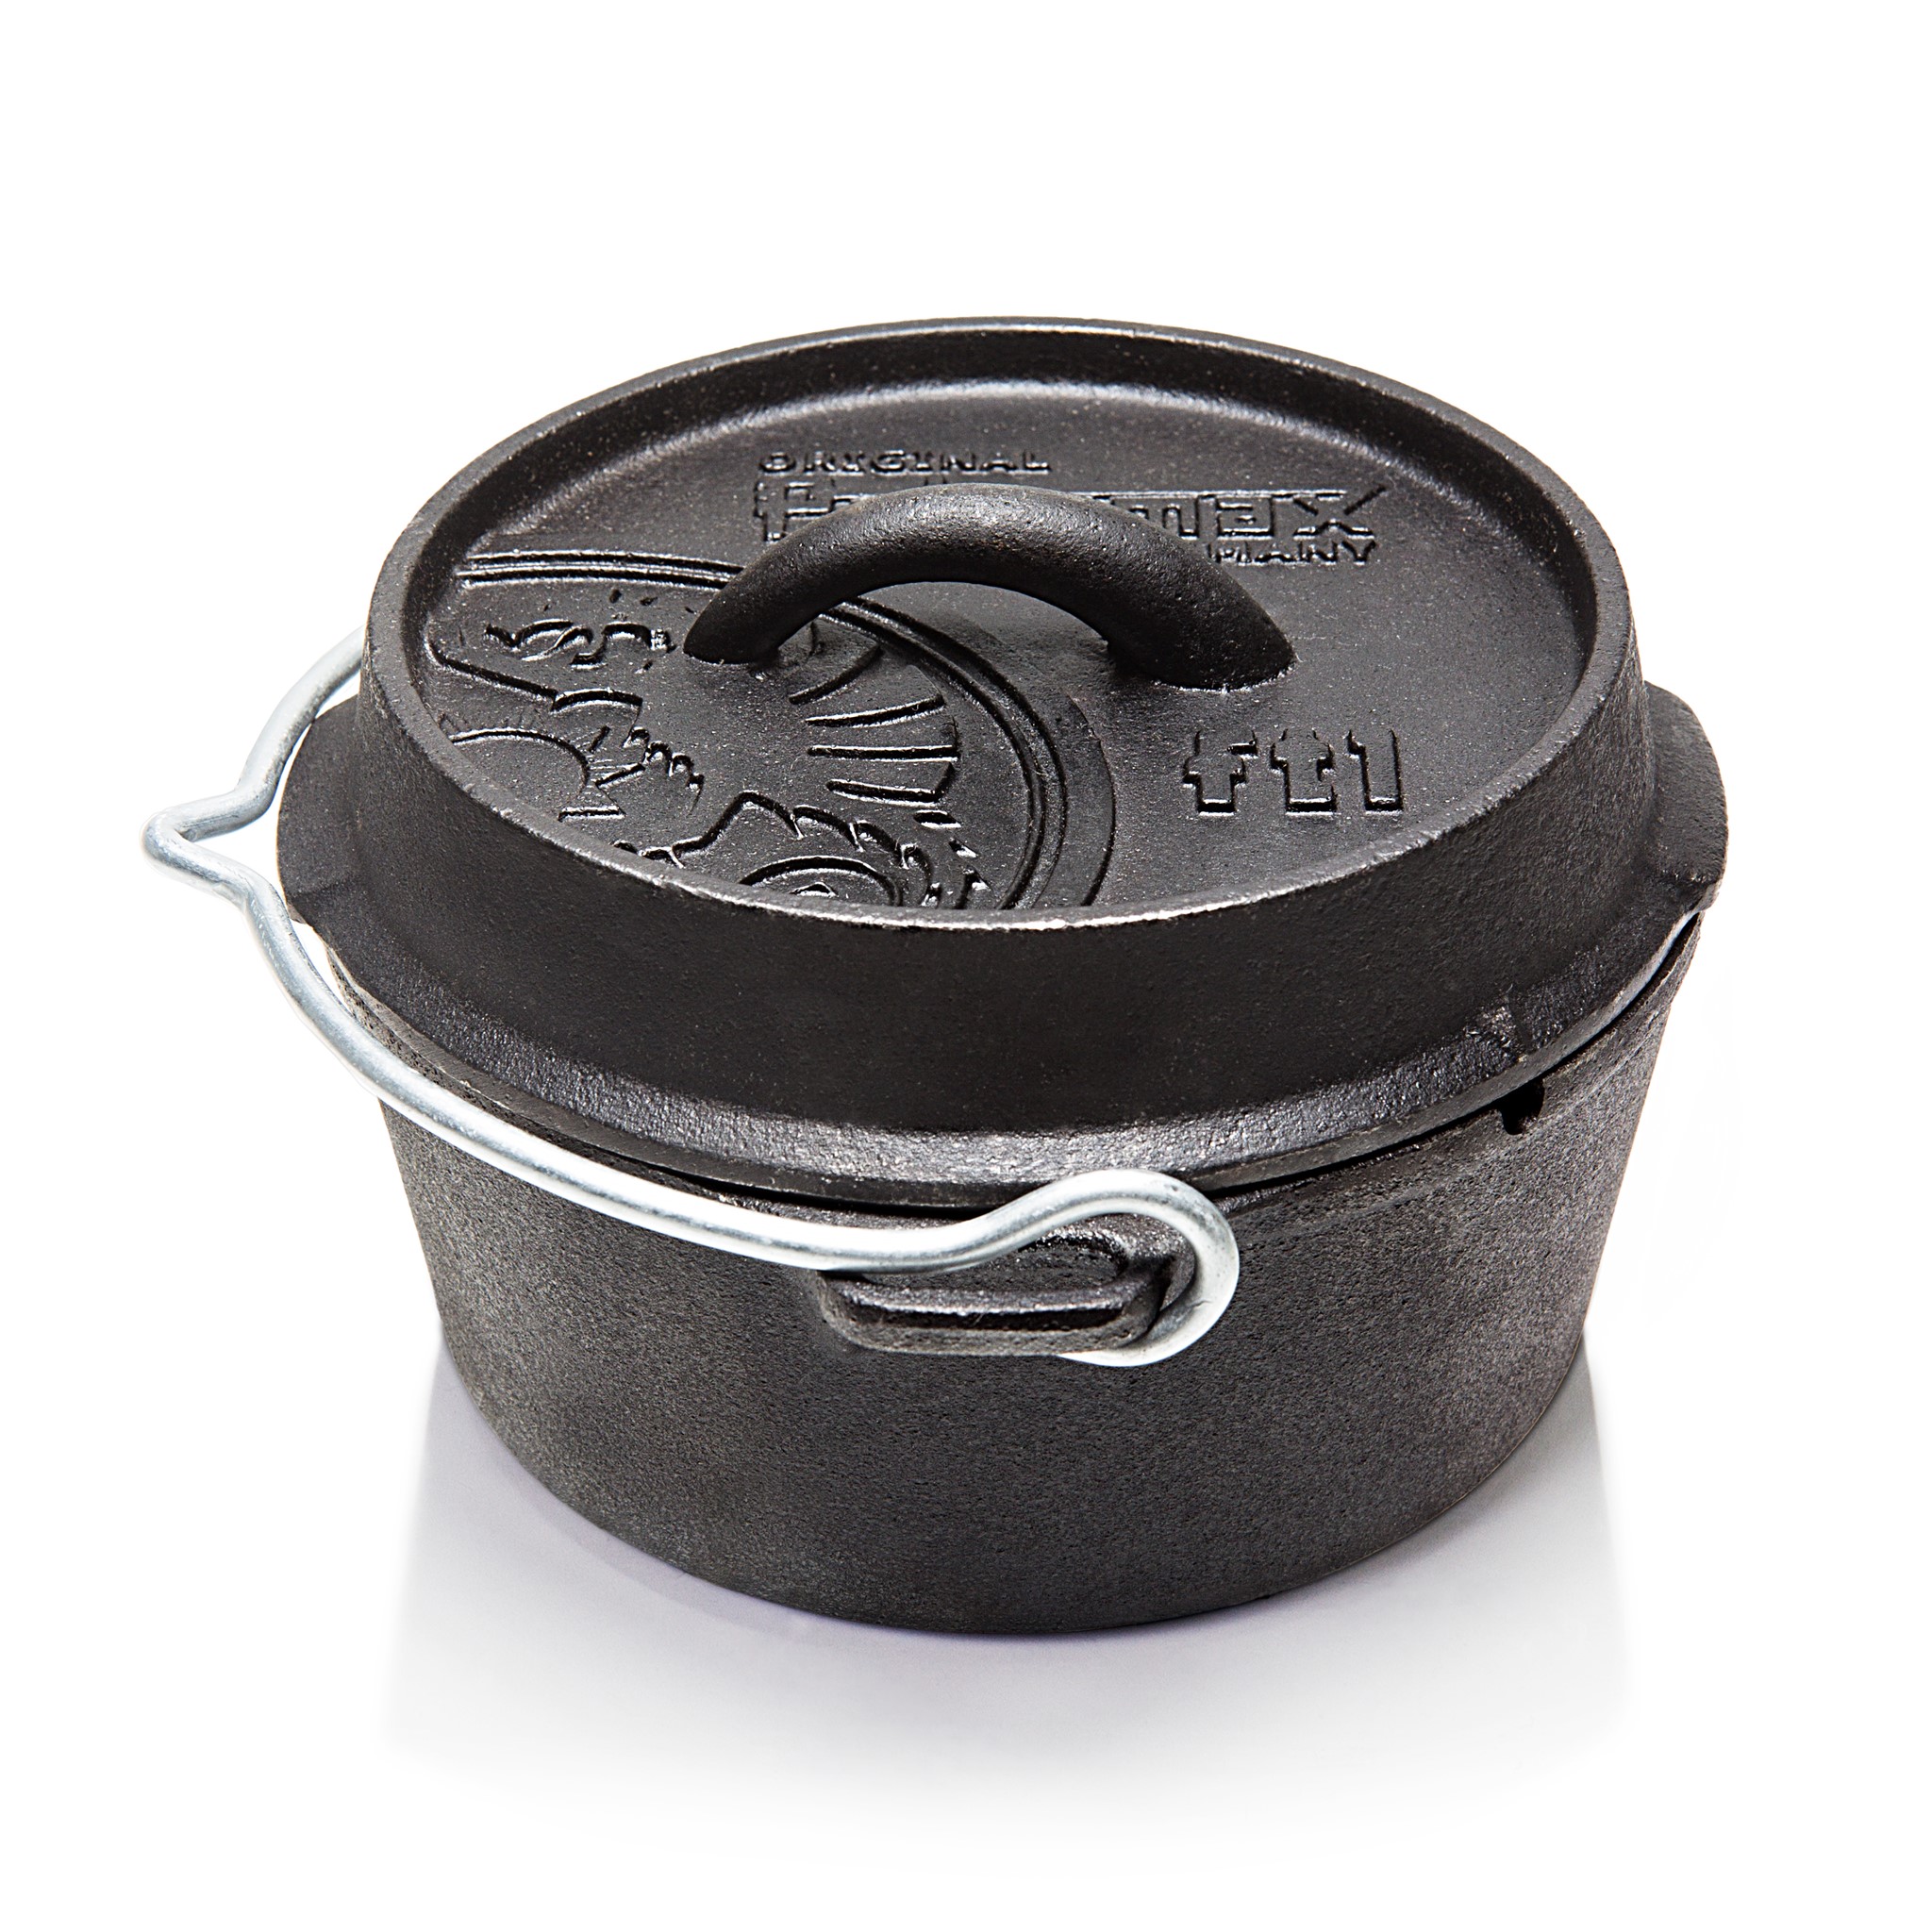 Picture of Petromax - Dutch Oven FT1 Campfire Pot 0.93 Liter (without feet)